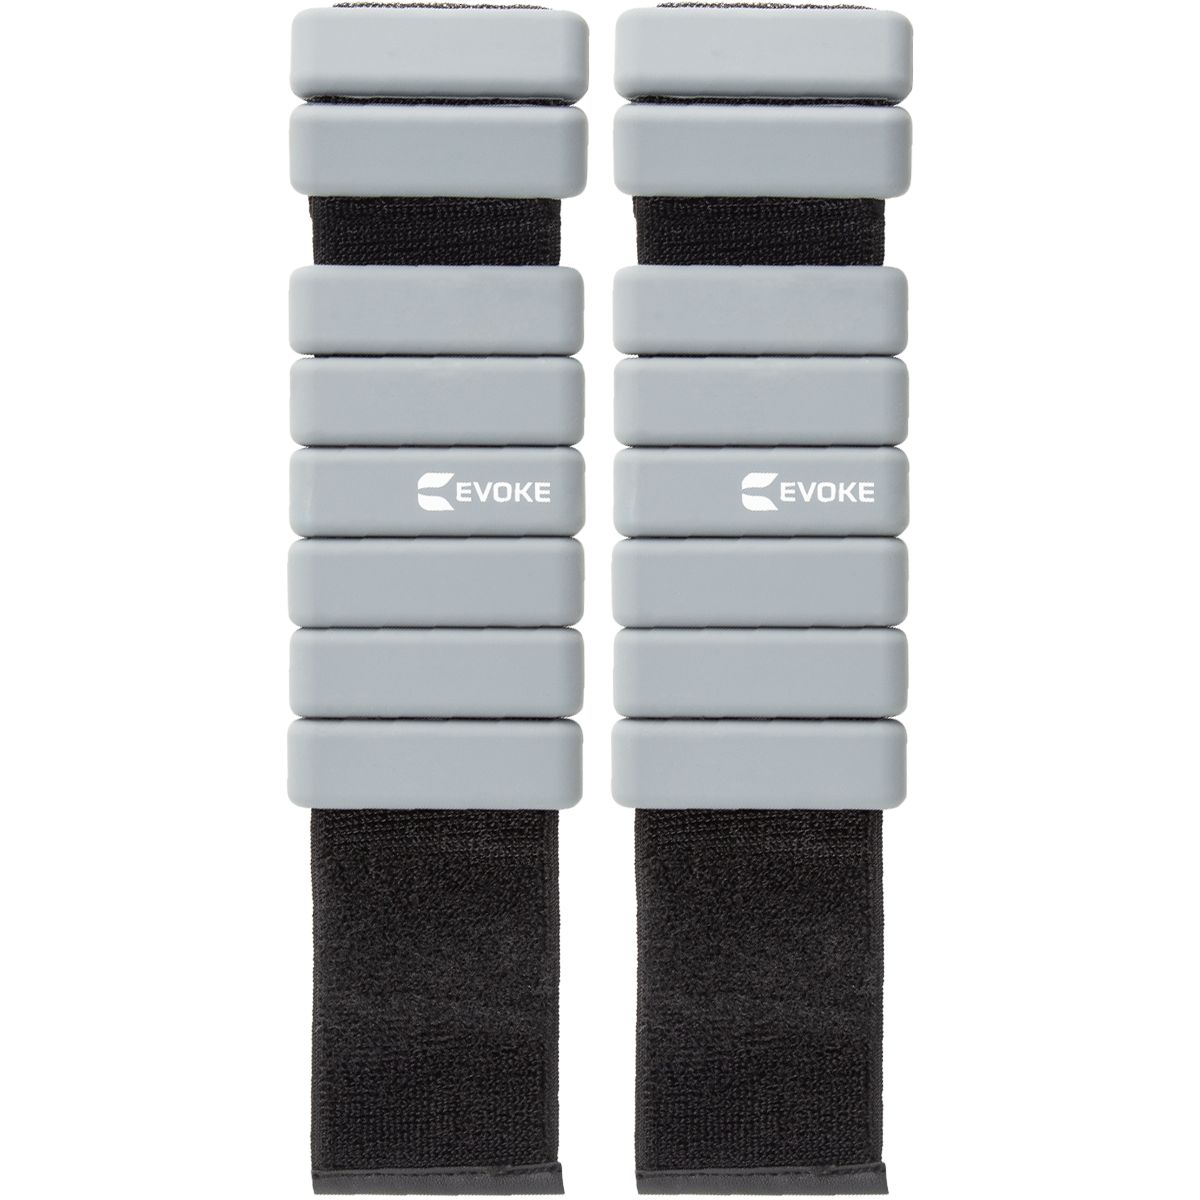 Image of Evoke Wrist and Ankle Weights